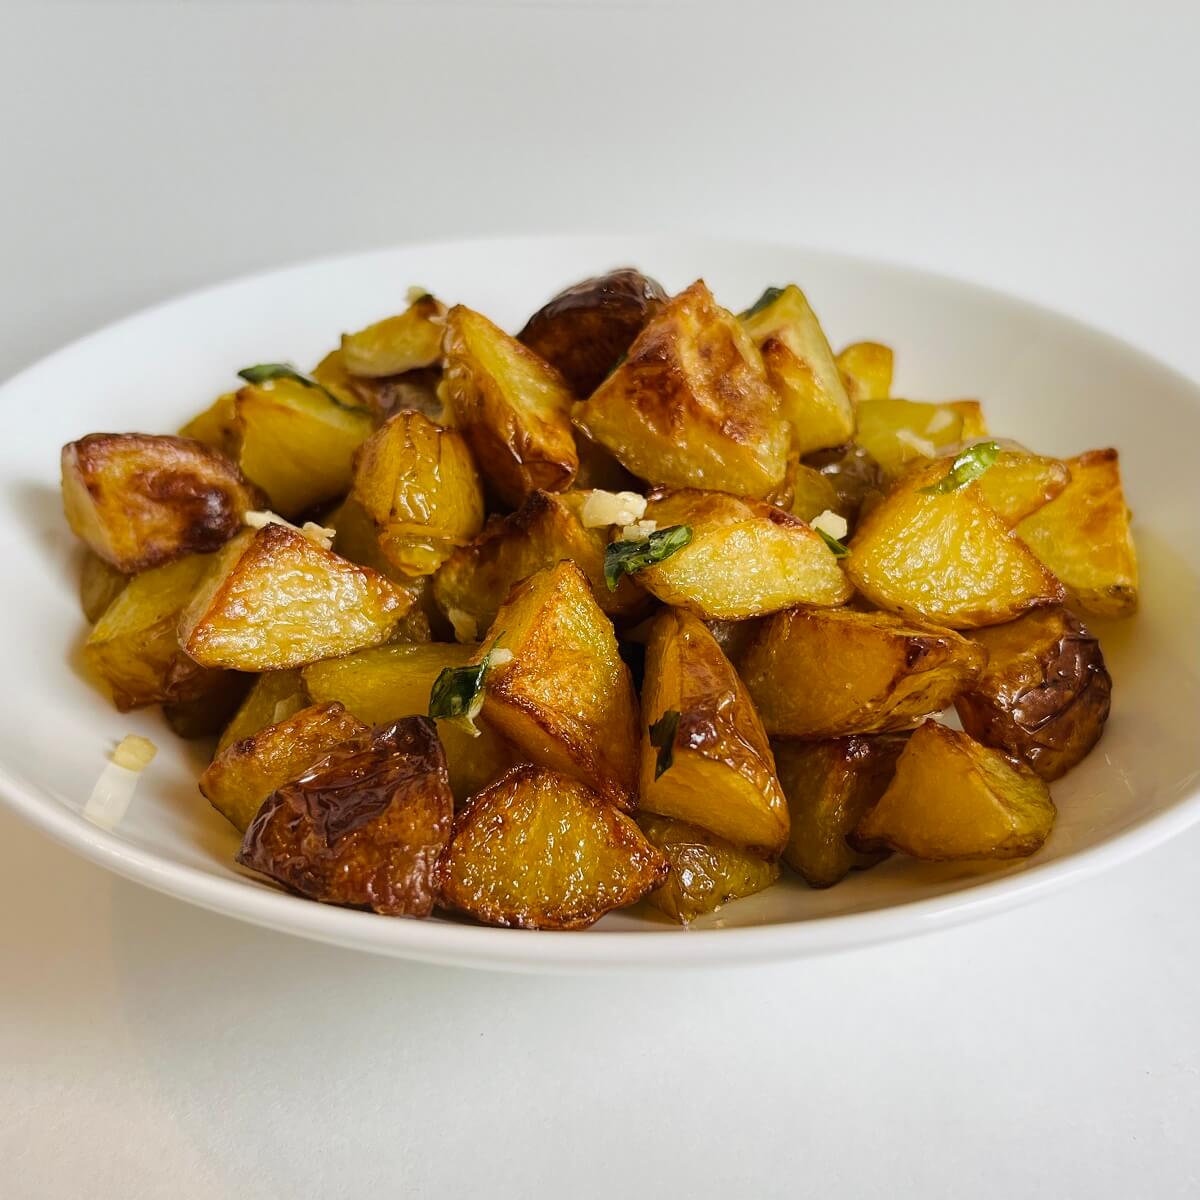 A bowl full of garlicky roasted potatoes.